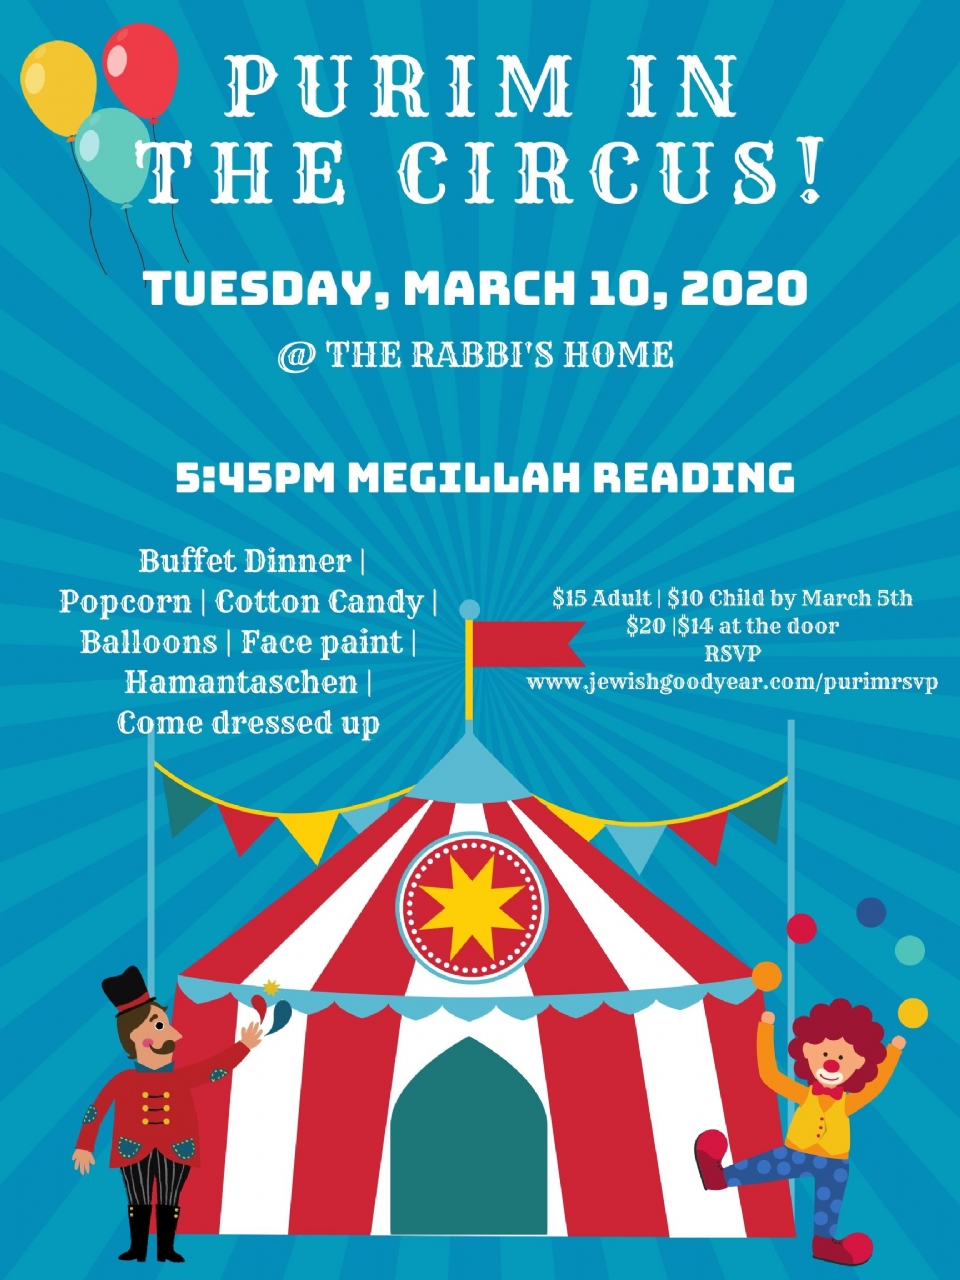 Purim in the Circus @ At the Rabbi's home